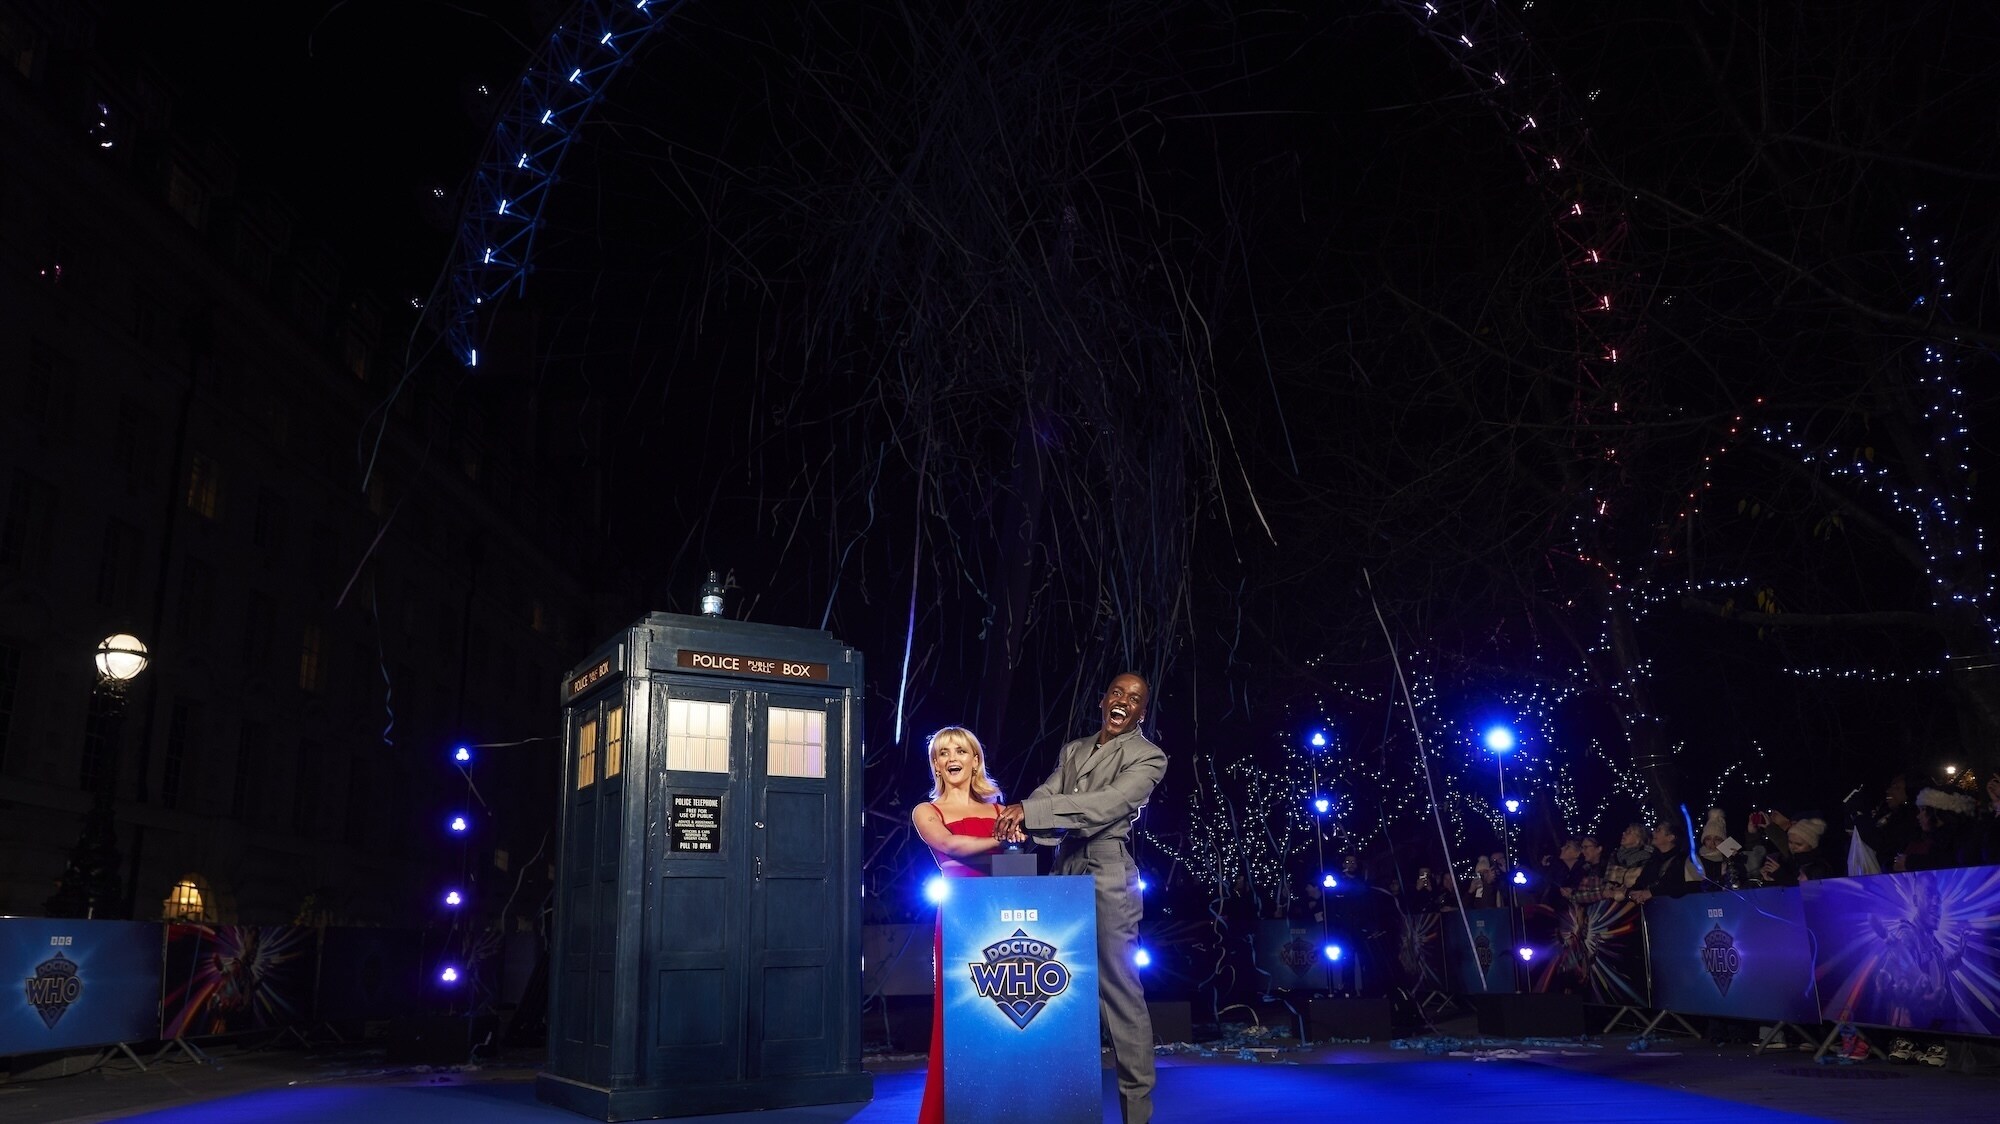 Disney+ Debuts Teaser For “Doctor Who” Christmas Special, Streaming December 25